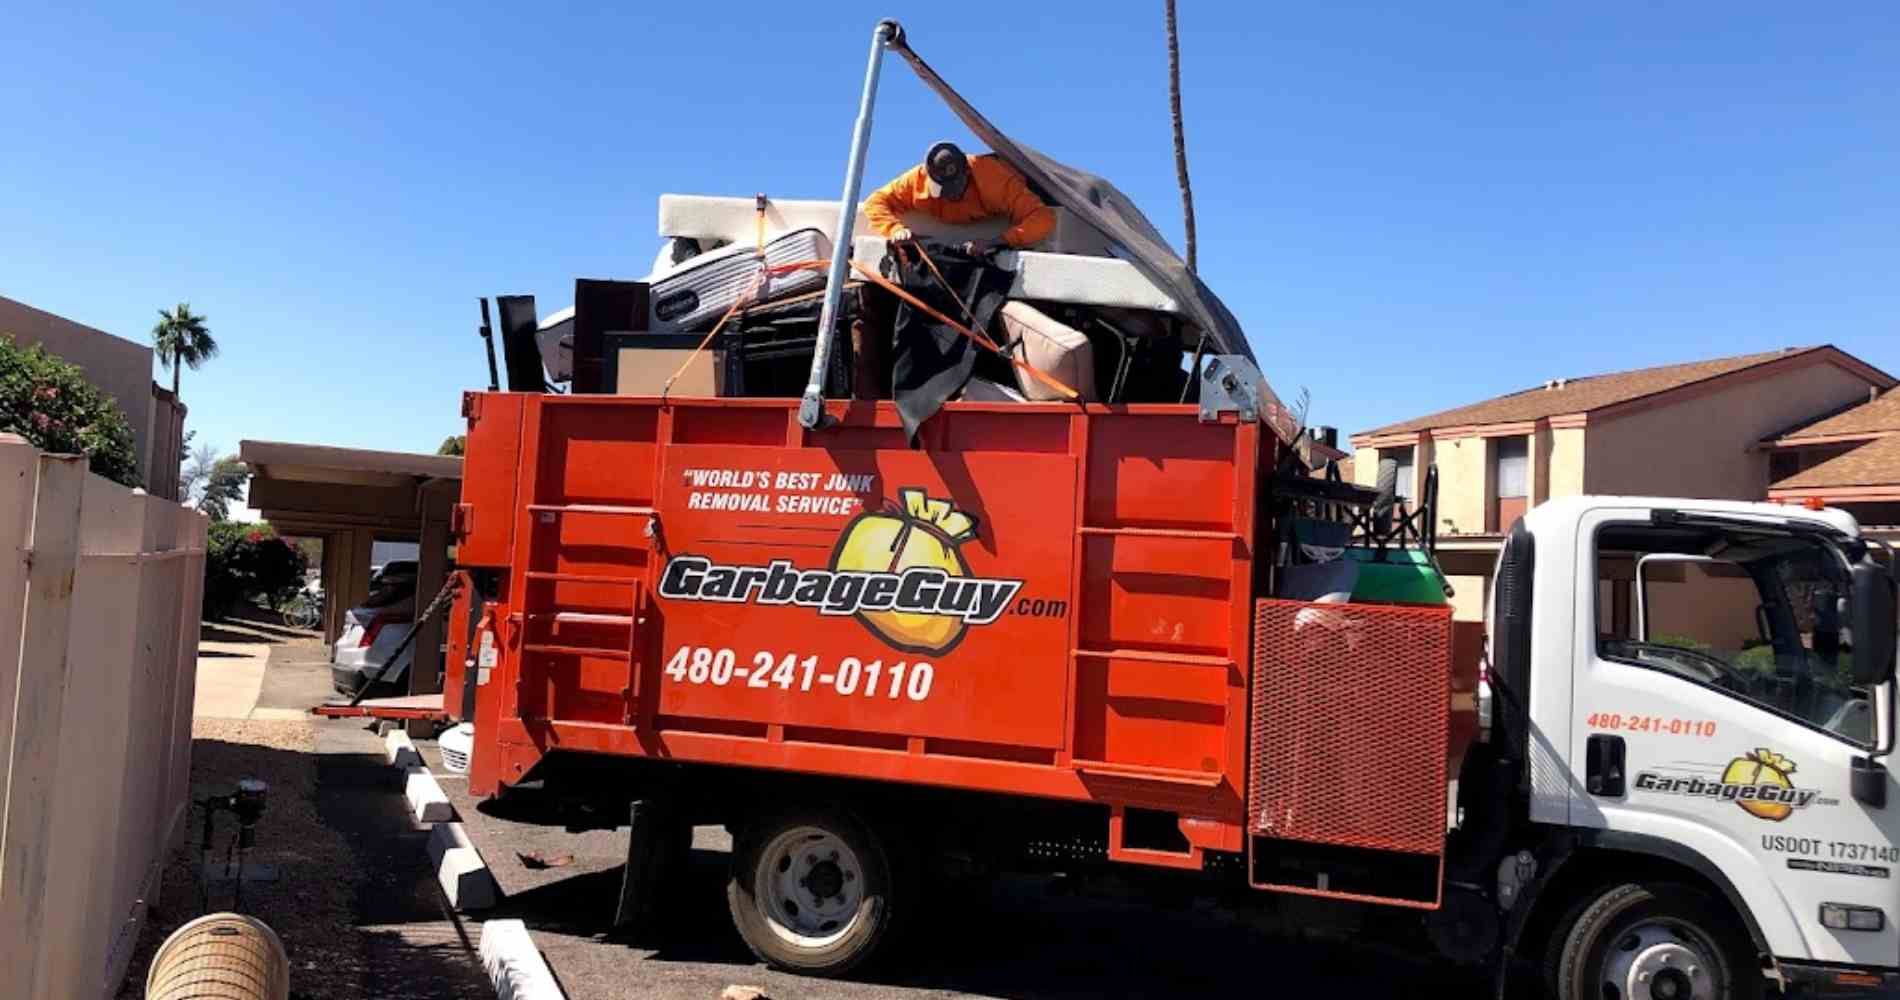 #1 for Furniture Removal in Maricopa, AZ With Over 1200 5-Star Reviews!